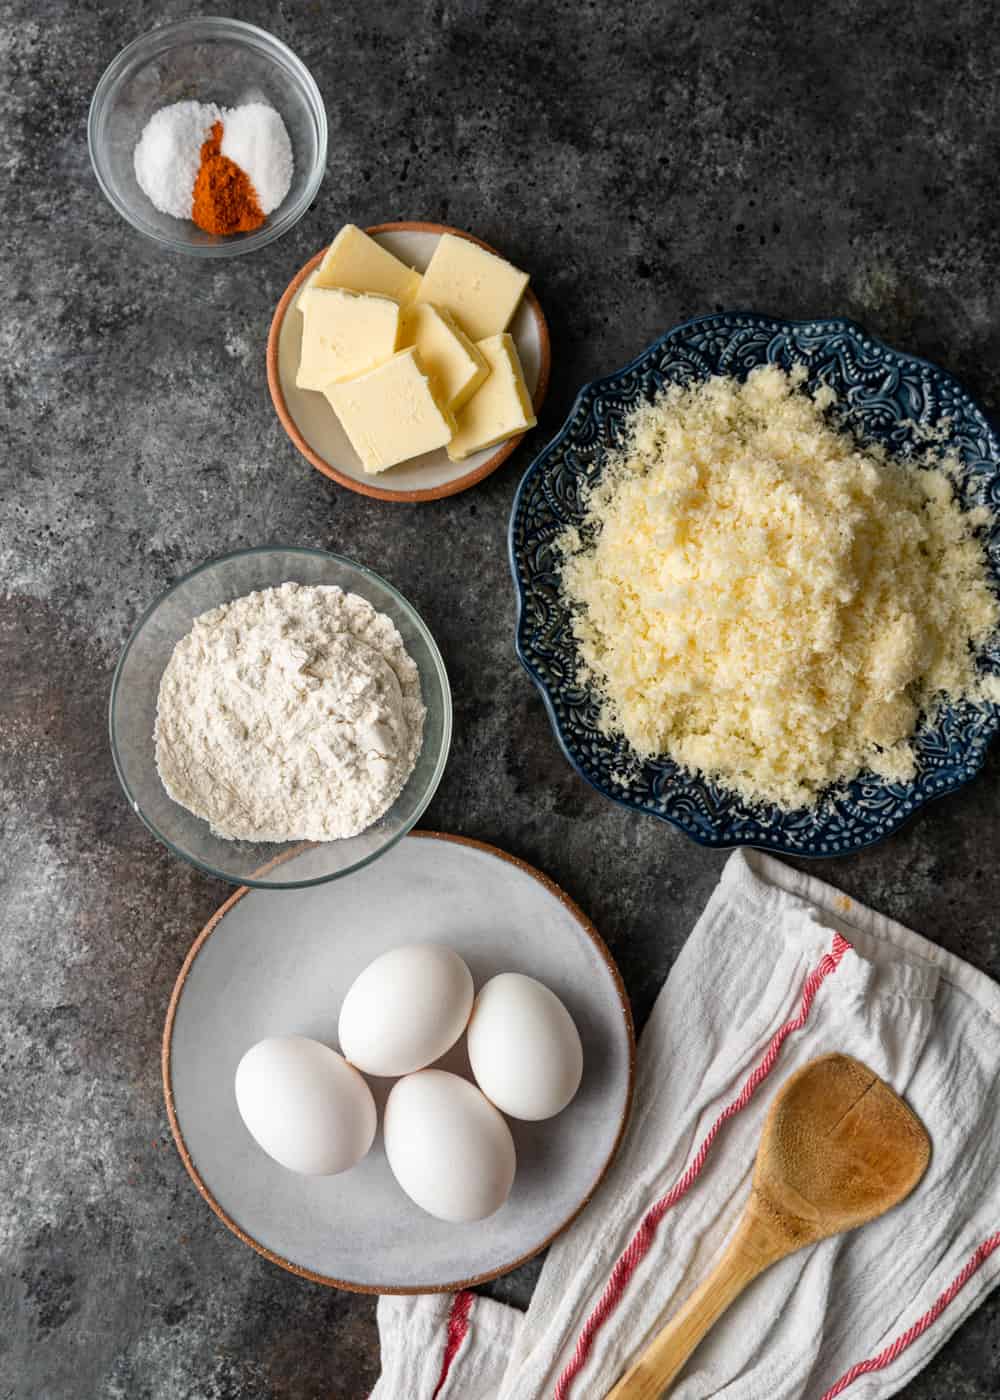 eggs, butter, flour and other ingredients to make choux pastry recipe for cheesy appetizers called gougeres